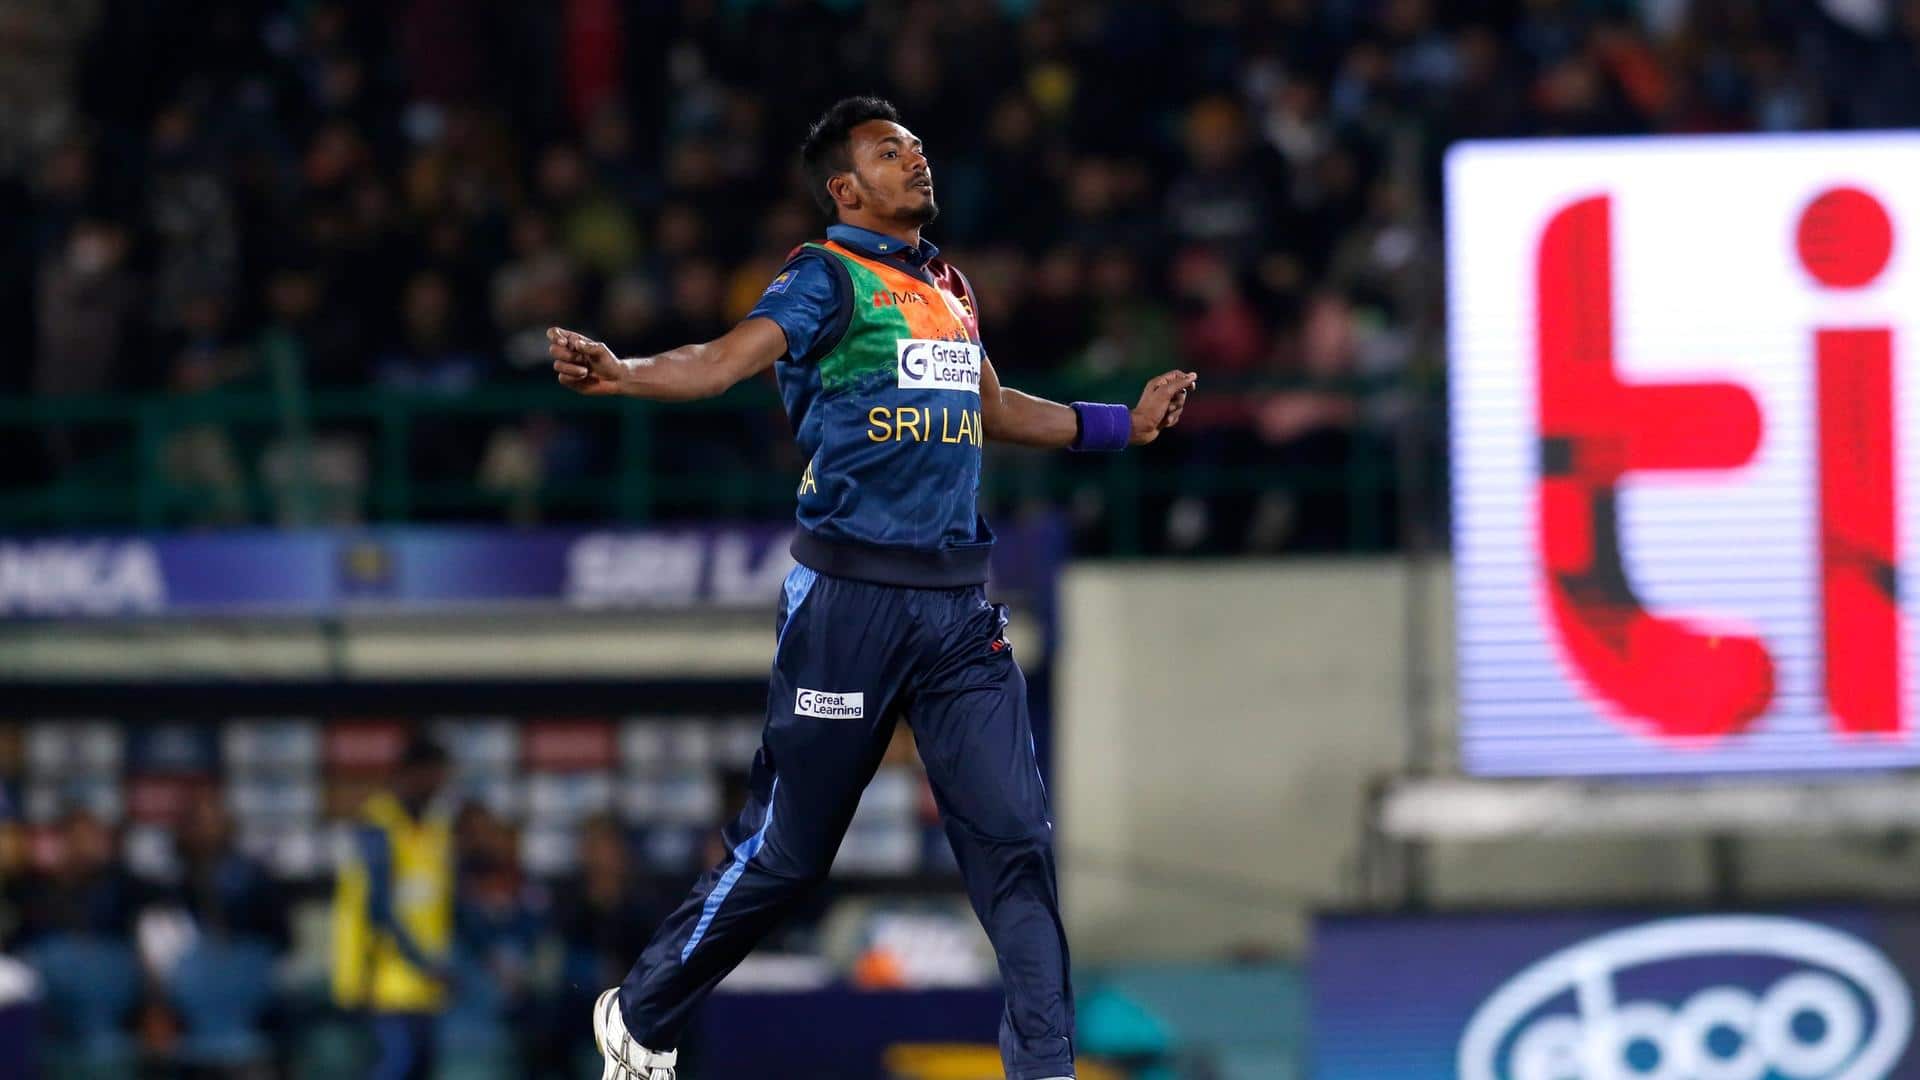 SL pacer Dushmantha Chameera races to 50 ODI wickets: Stats